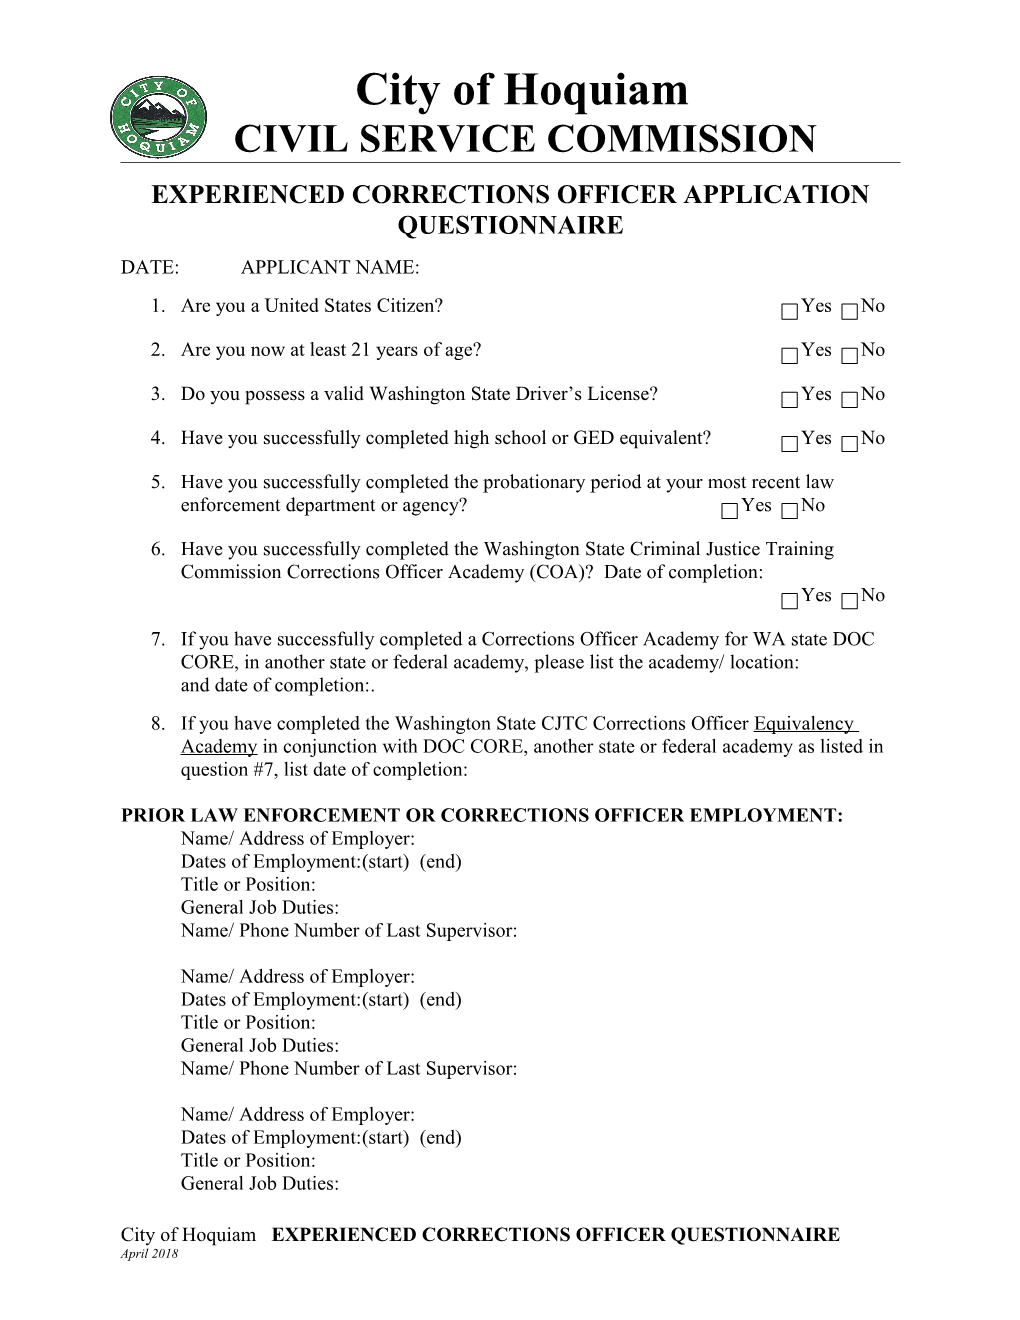 Experienced Correctionsofficer Application Questionnaire